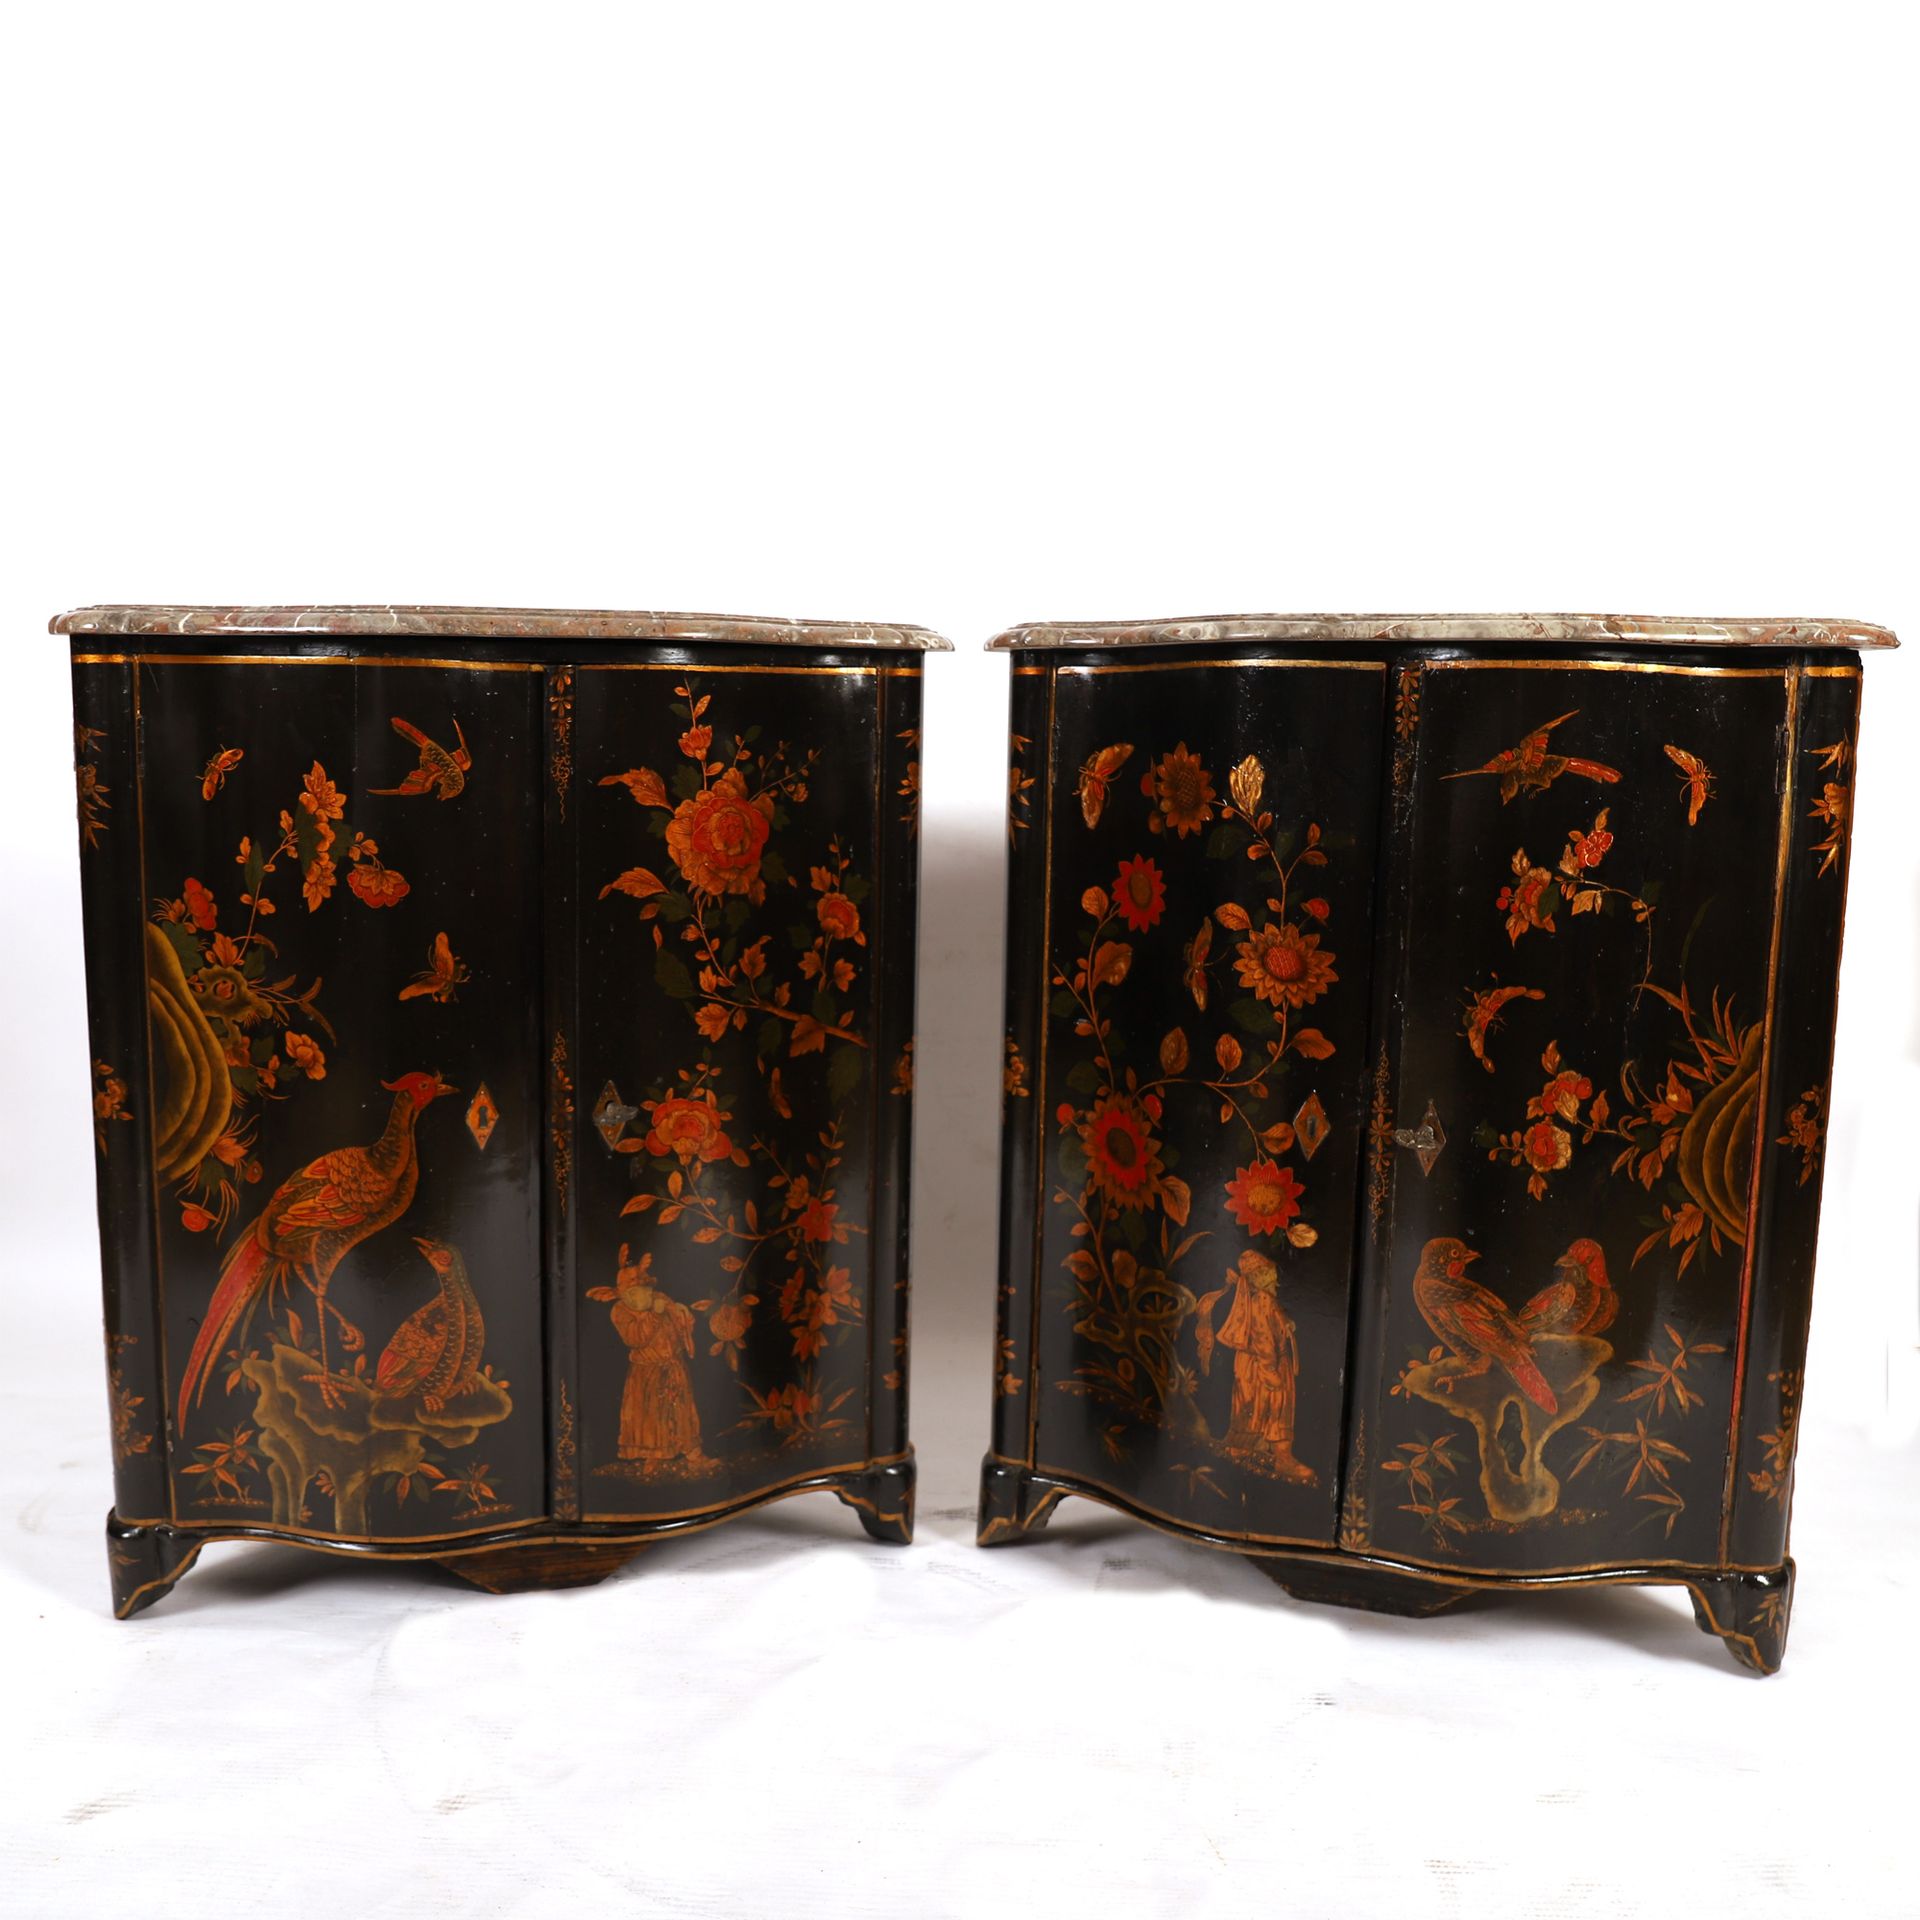 Null PAIR OF CHINOIS DECORATION IN MARTIN VERNIS, 18th century

Veined marble to&hellip;